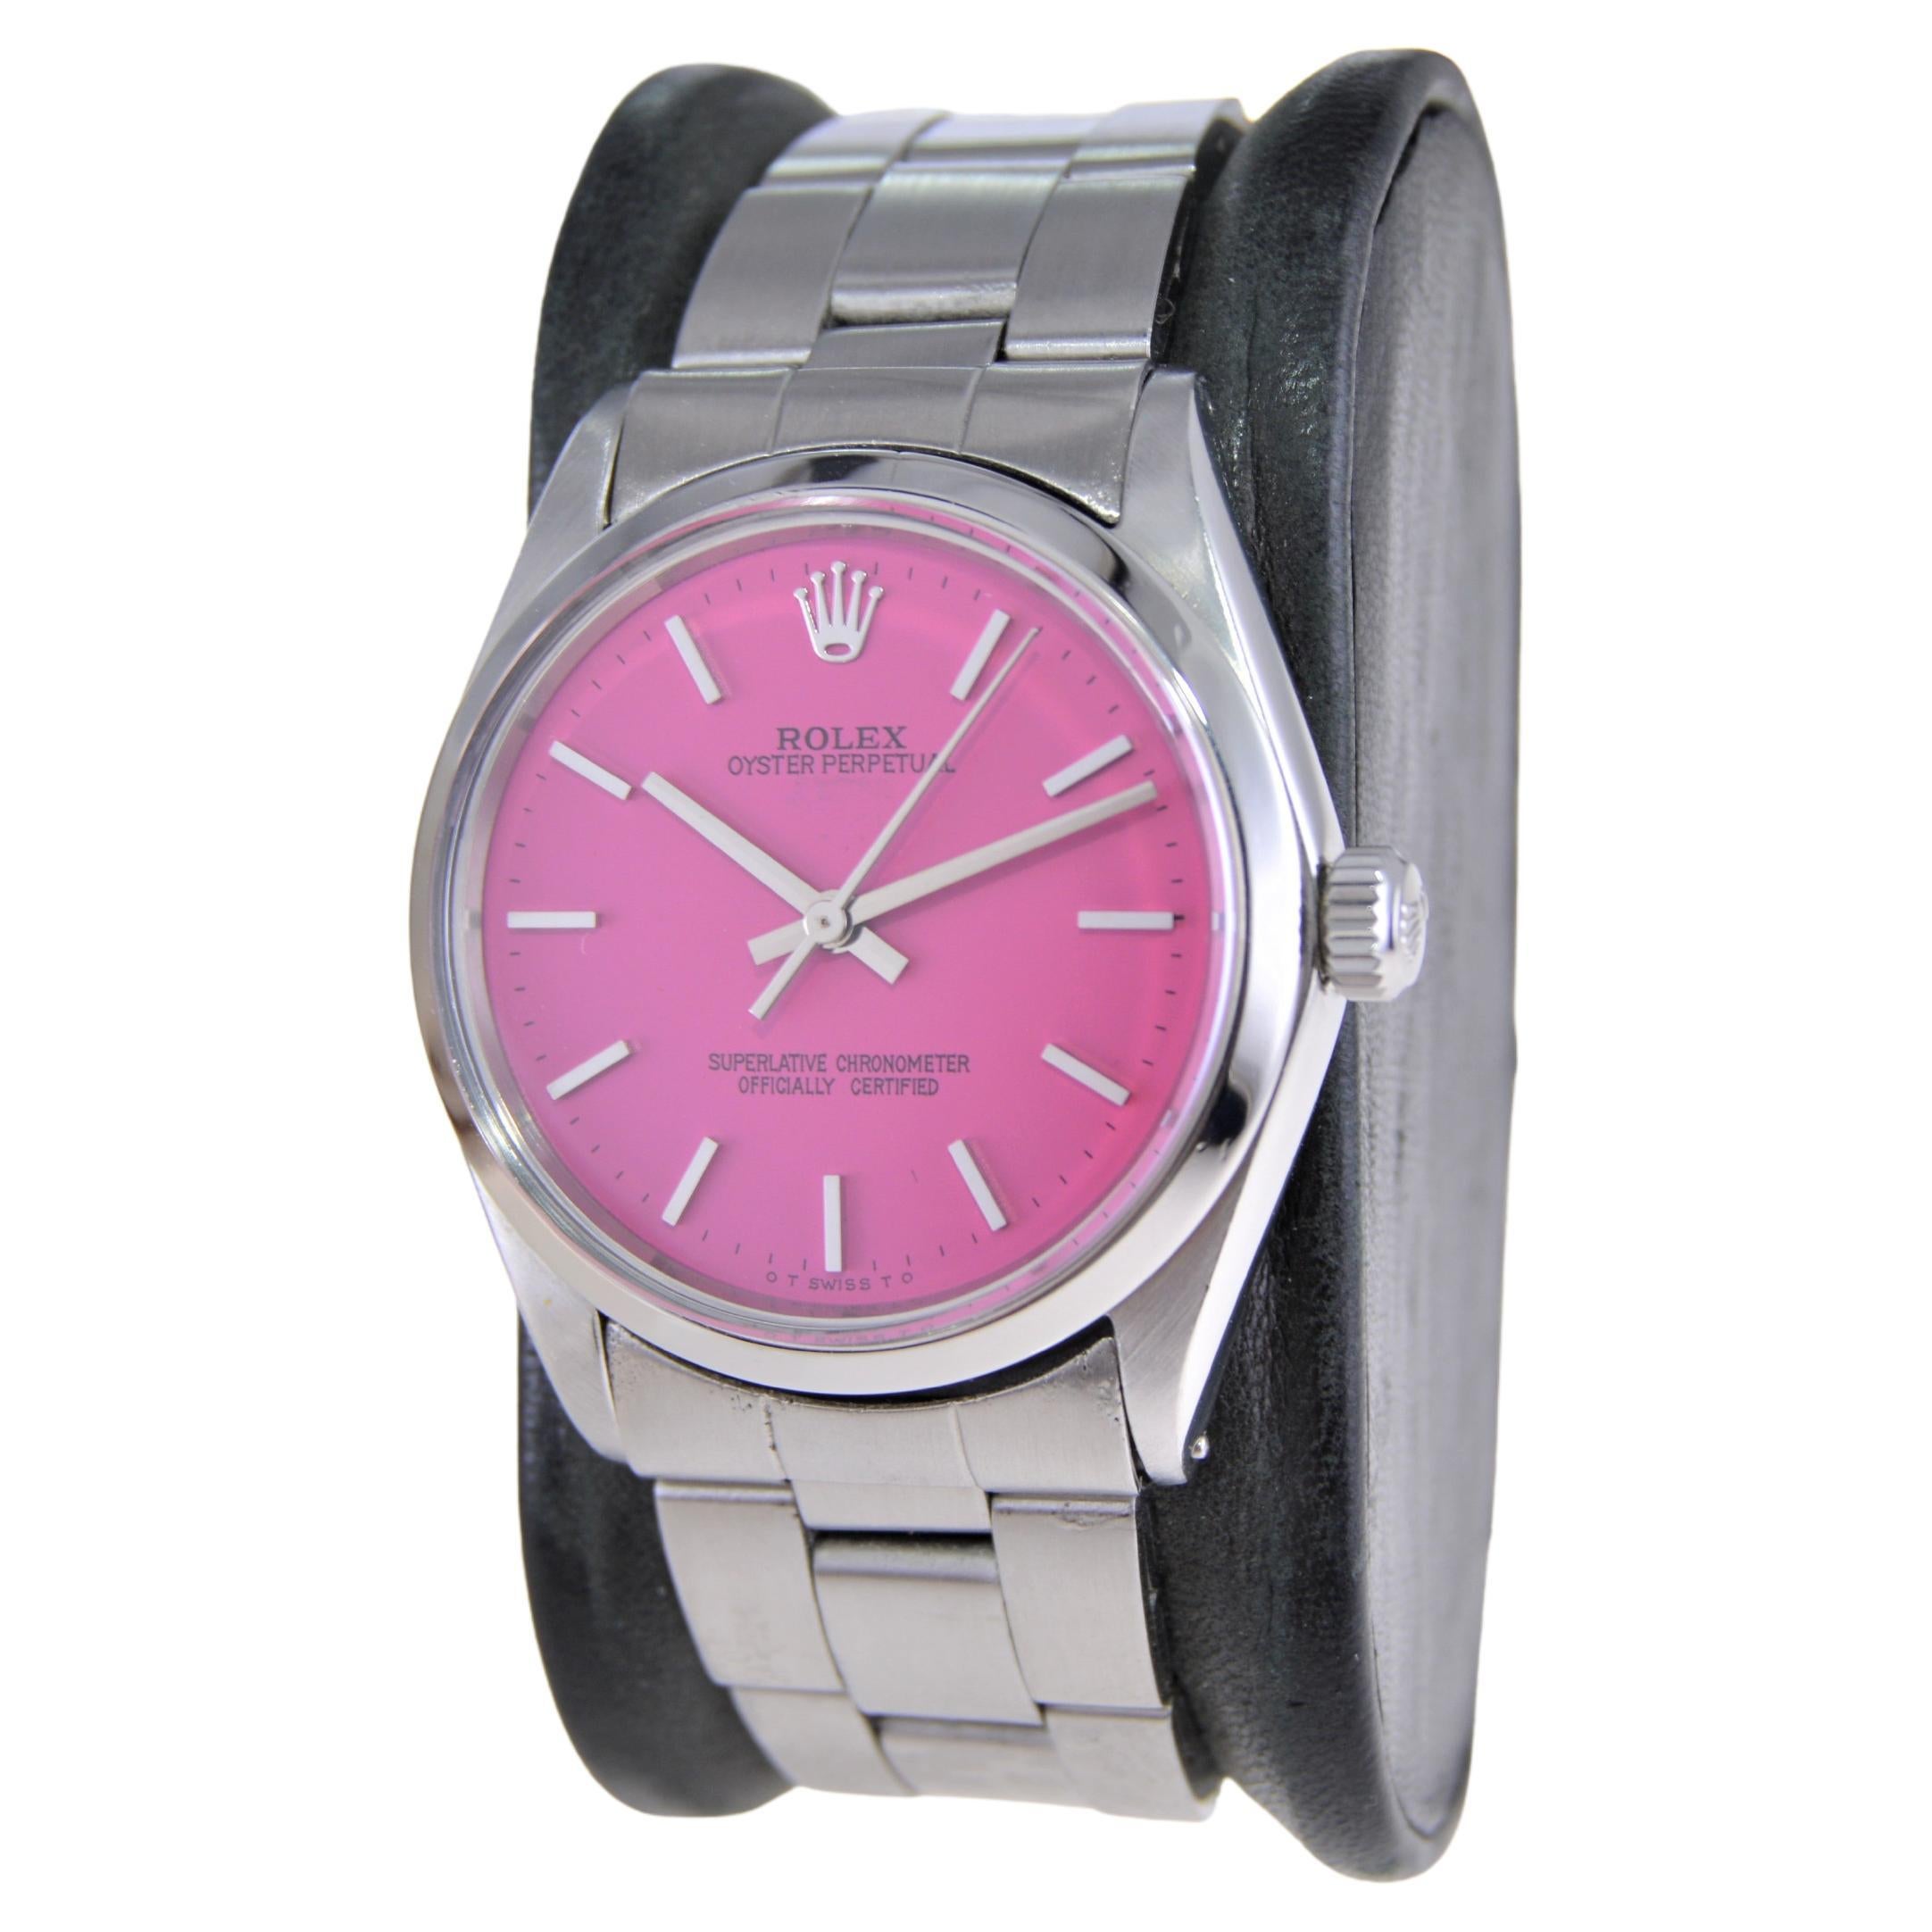 Rolex Stainless Steel Oyster Perpetual with Custom Hot Pink Dial, 1960s In Excellent Condition For Sale In Long Beach, CA